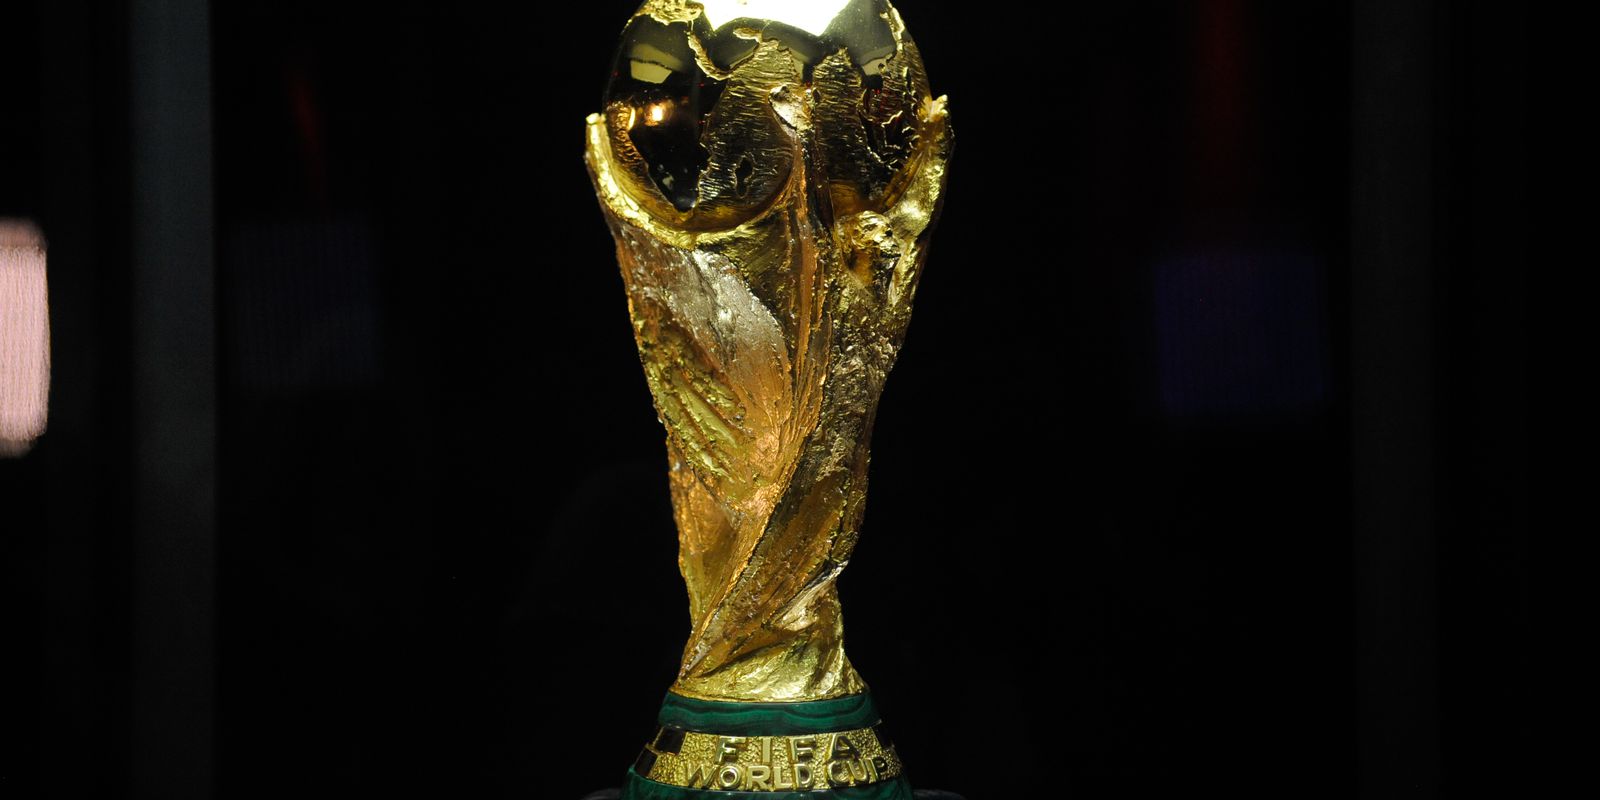 Organized by Jules Rimet, the World Cup reaches its 22nd edition in Qatar